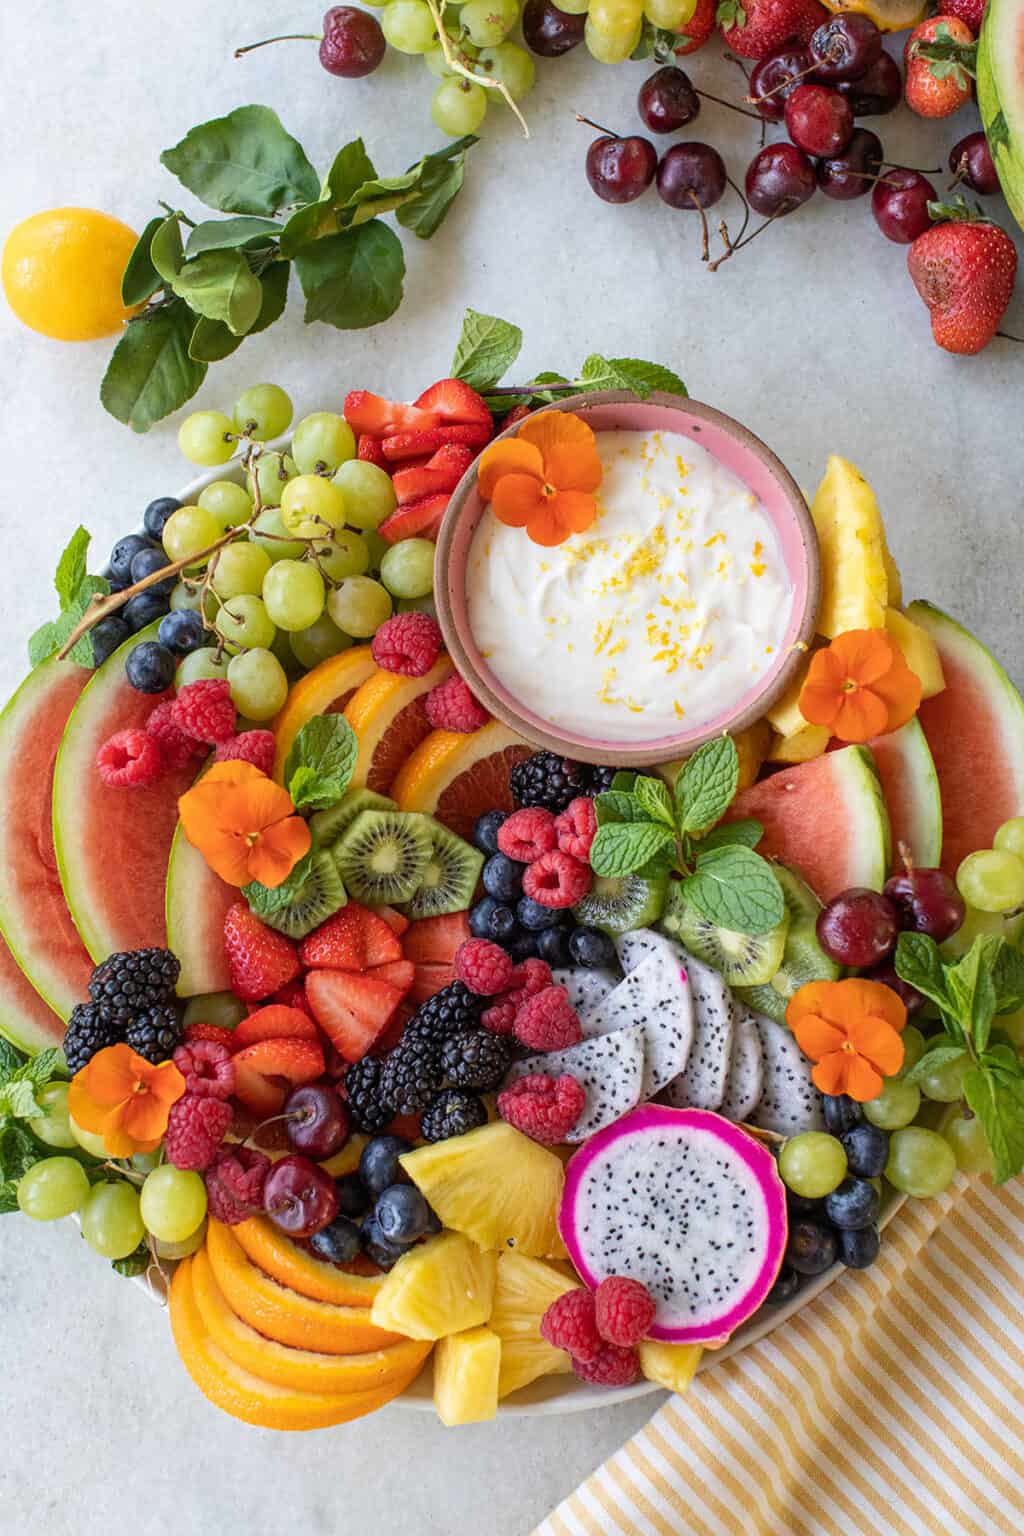 How to Make a Beautiful Fruit Platter - Sugar and Charm